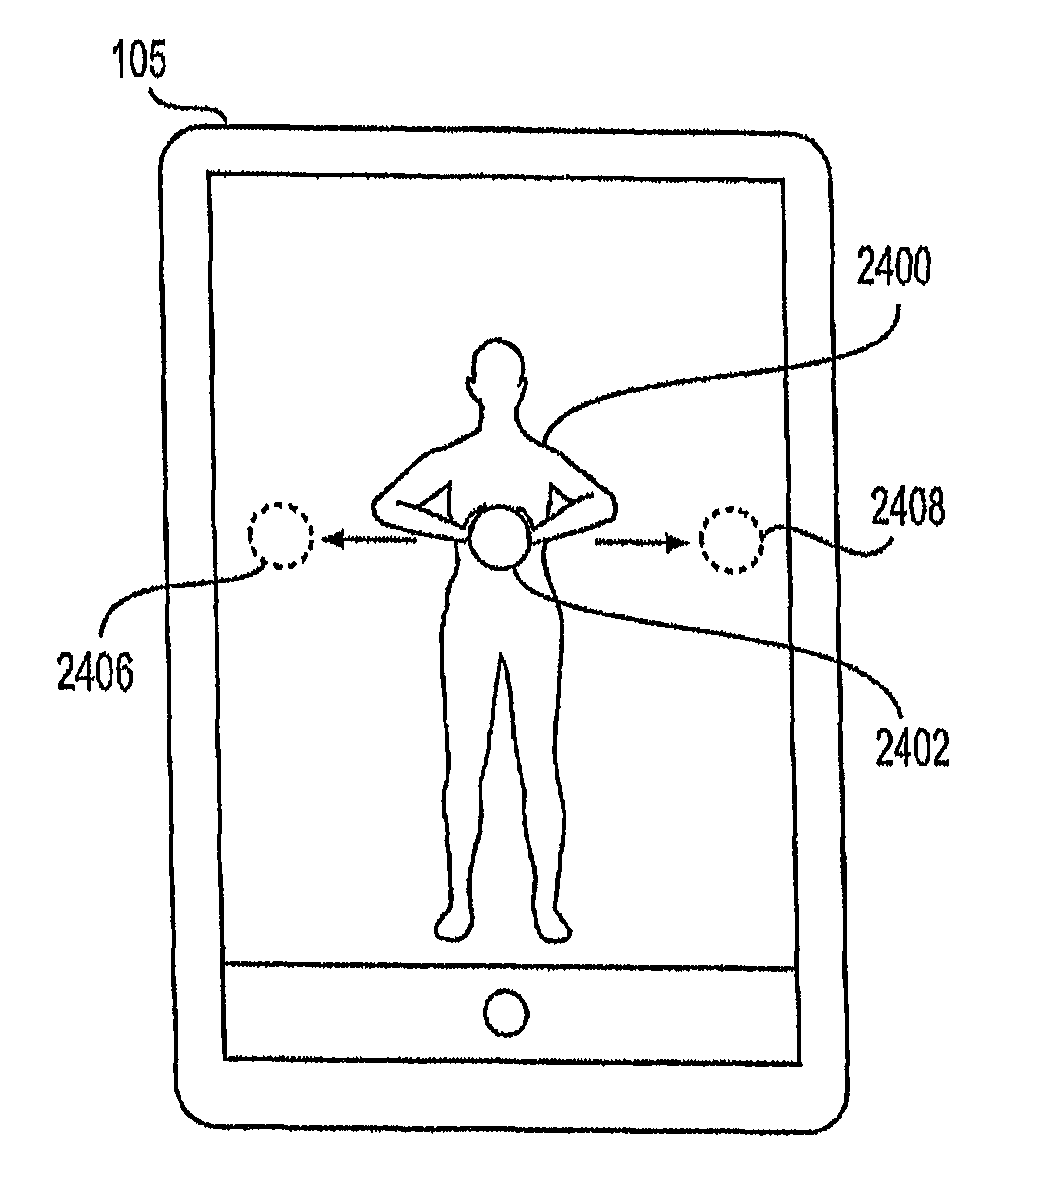 Exercise tracking and analysis systems and related methods of use